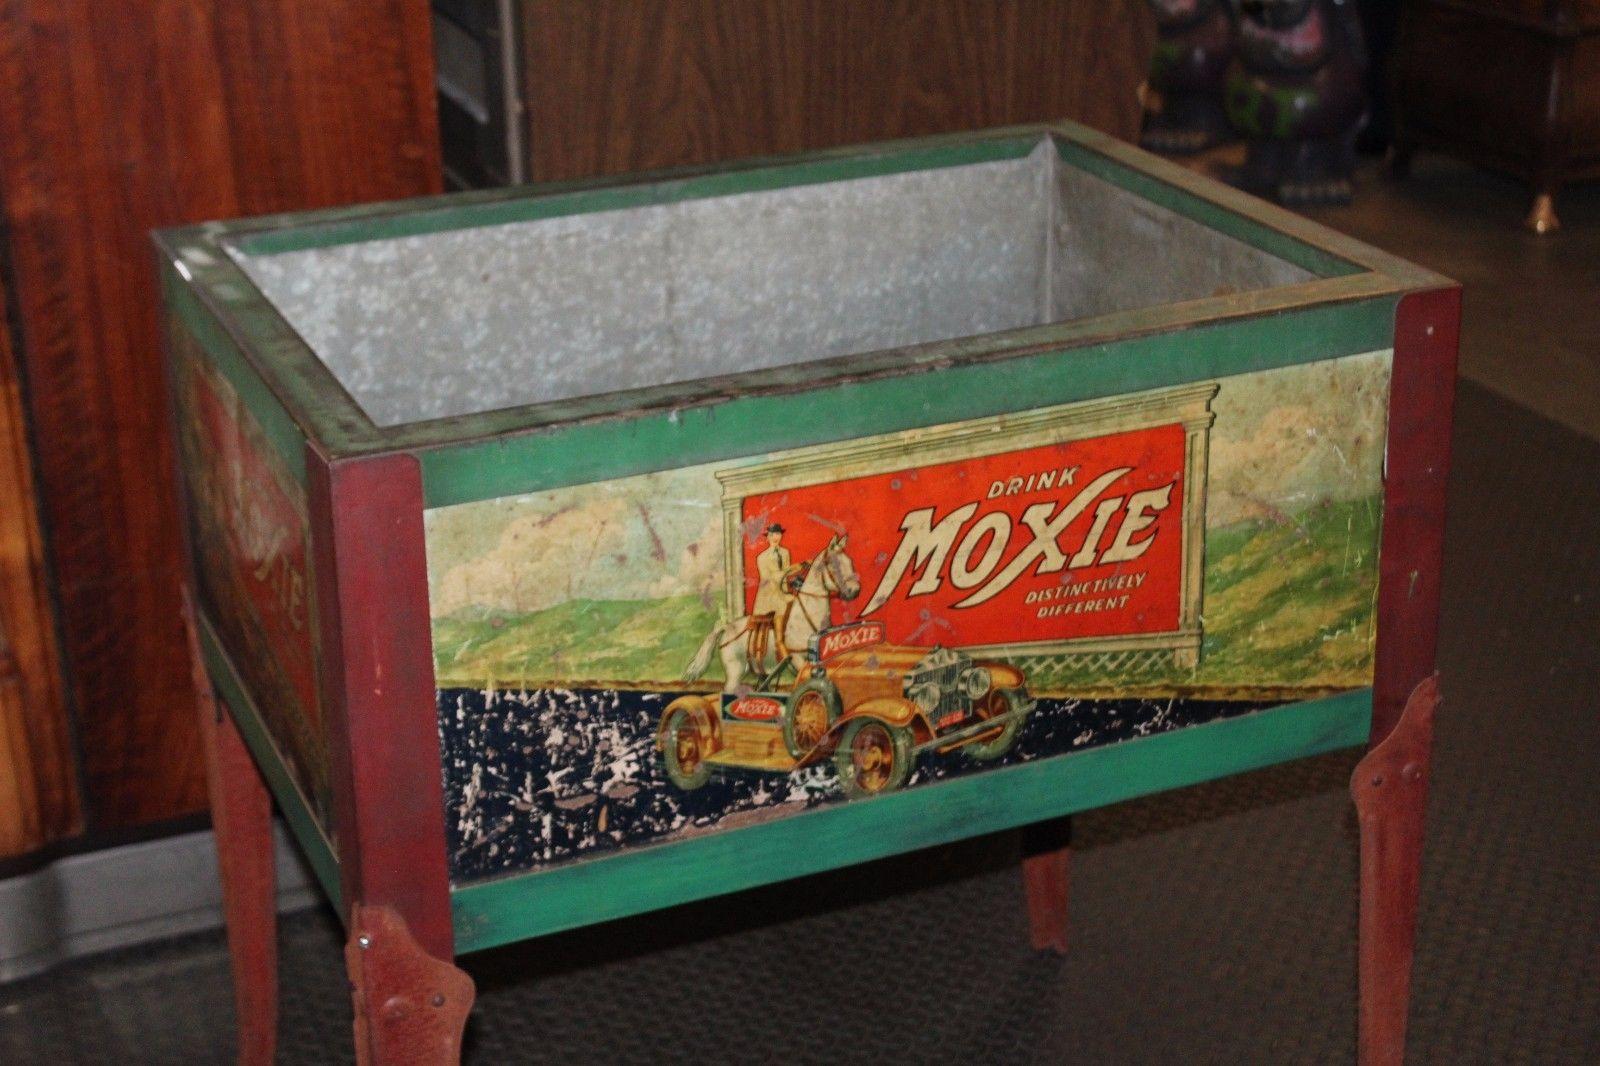 “Moxie” soda is of monumental importance to soda history. For years, Moxie was the dominant soda on the market, out-selling the likes of Coca-Cola and Pepsi Cola. All original 1920s-1930s Moxie Soda service station cooler with four original panel